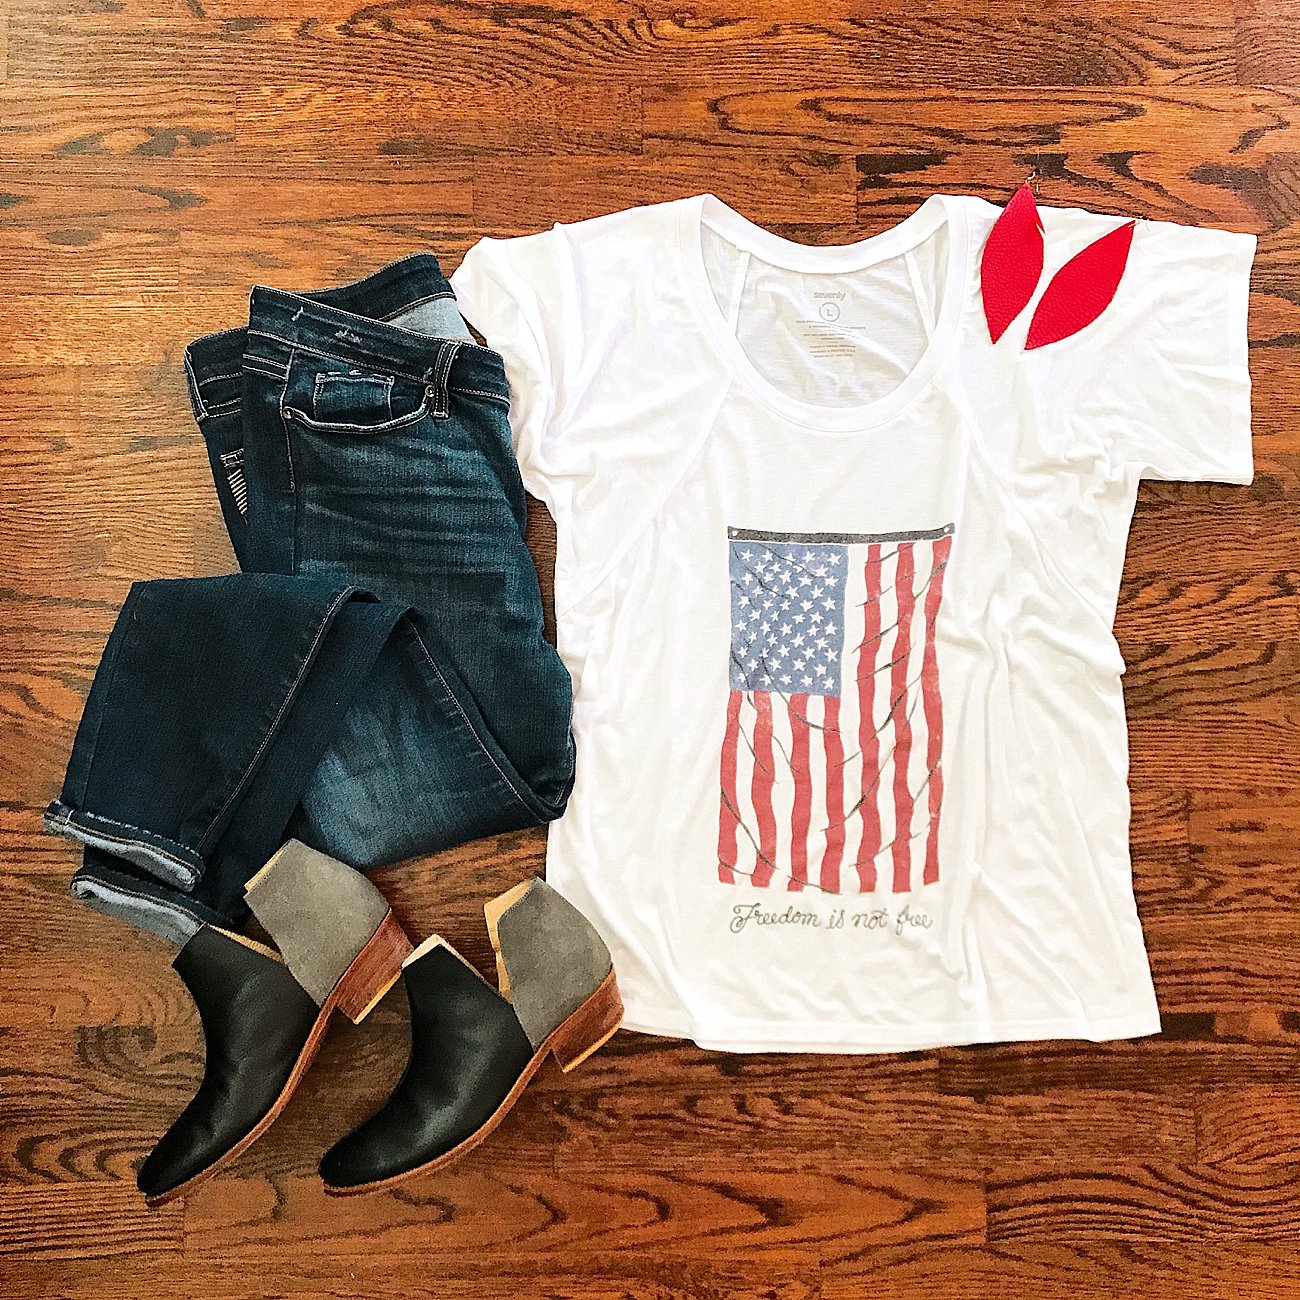 Sevenly - Coupon code MOLLY10 for 10% off